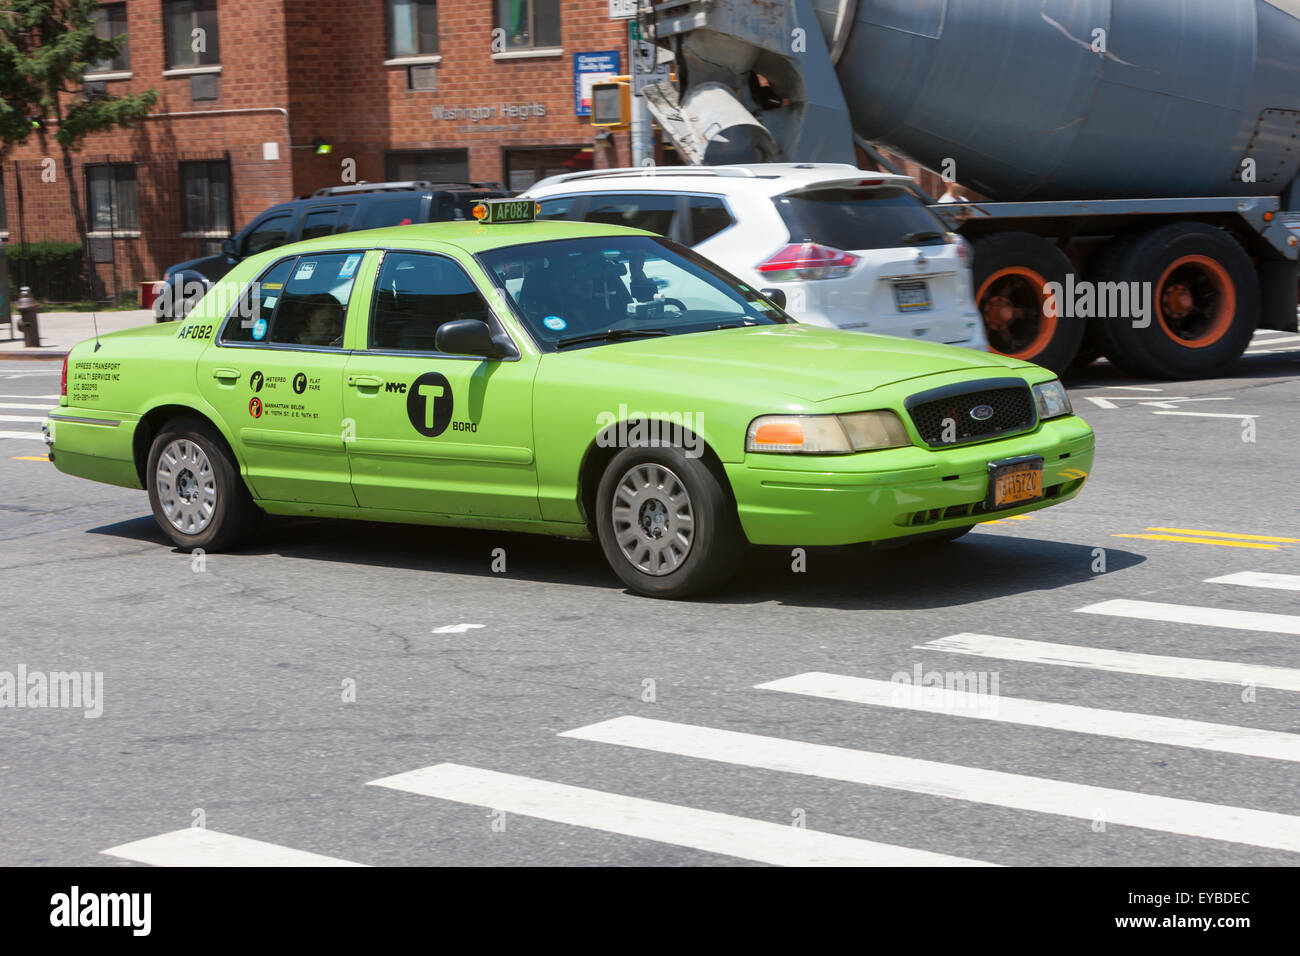 A green Boro Taxi in Washington Heights in New York City. Stock Photo